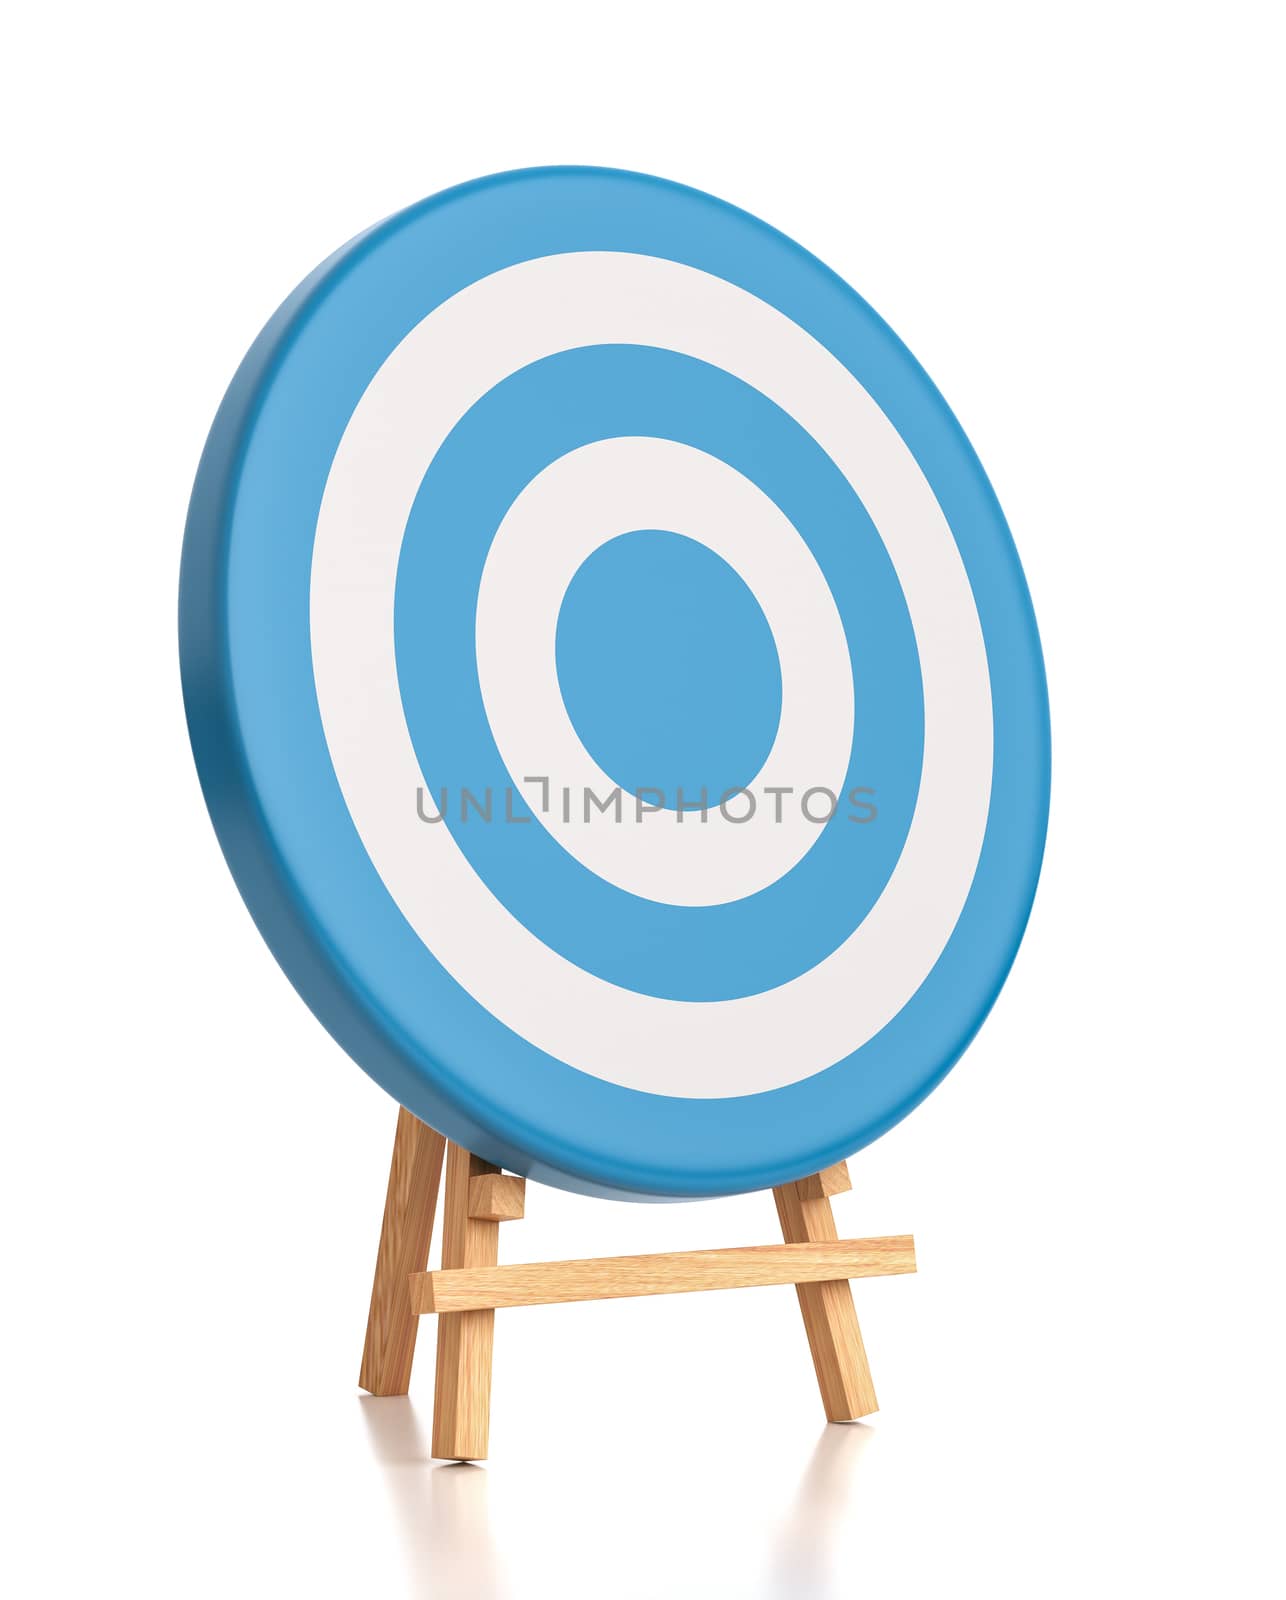 Blue Target on White Background by make